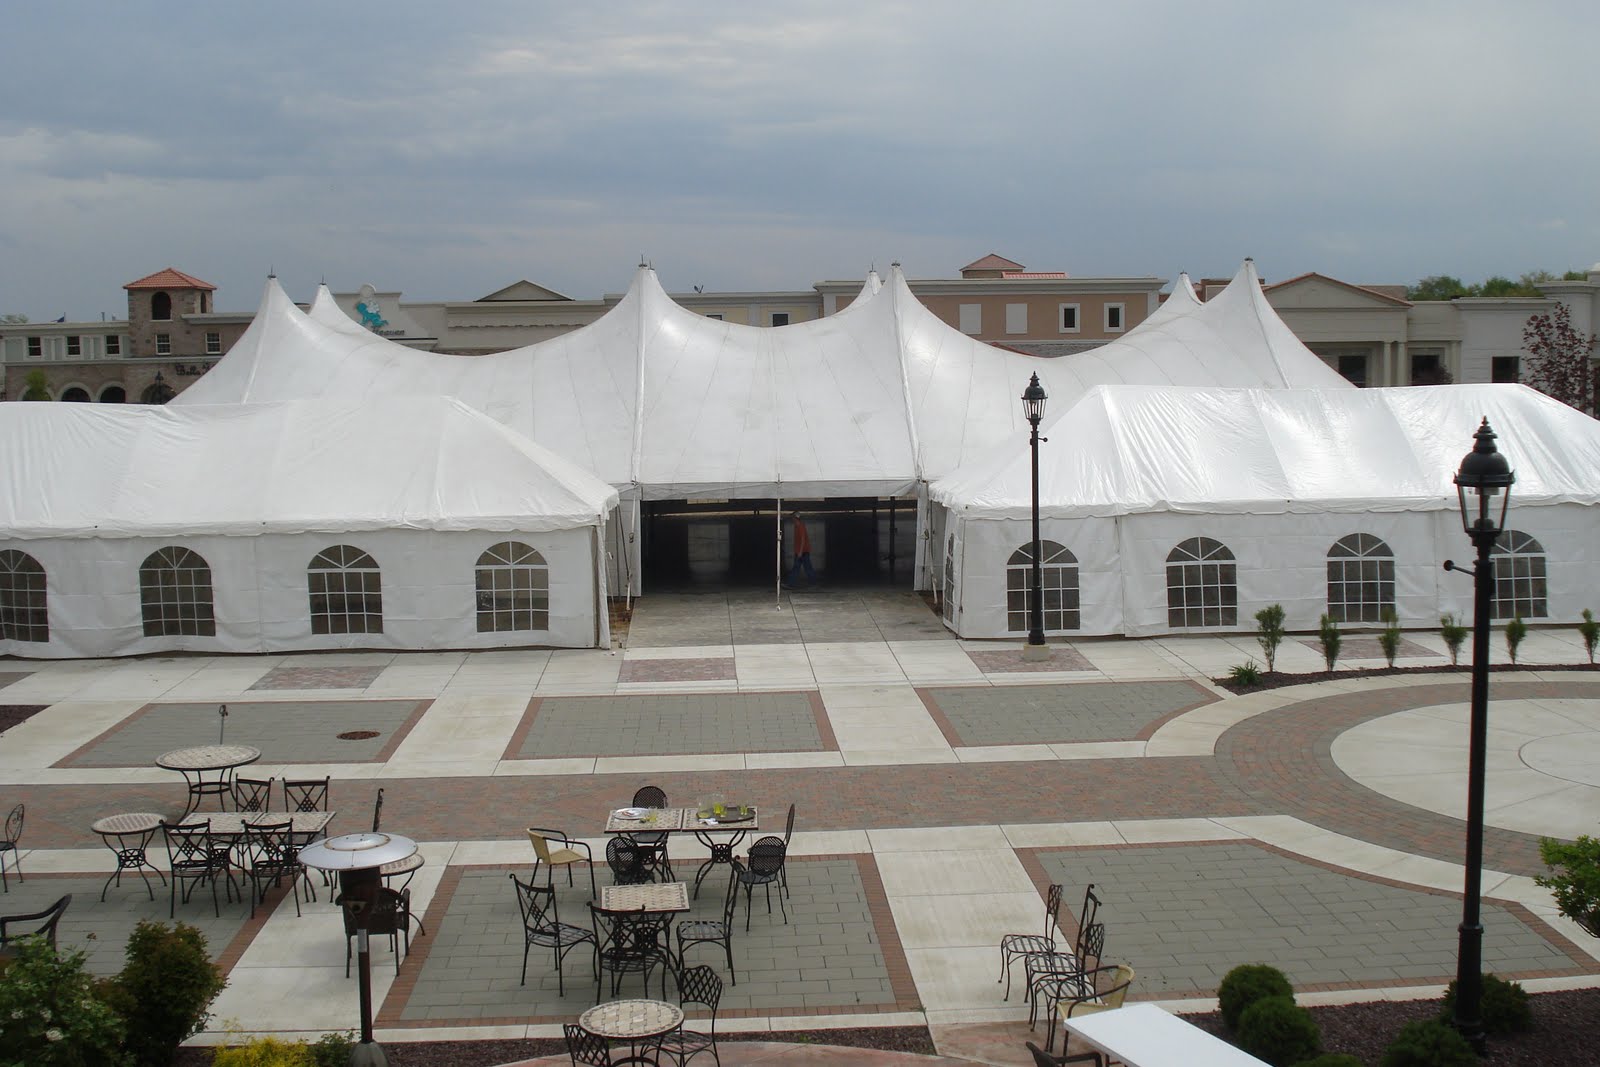 EuroTent, Indiana, Used as Concert Venue, 2010